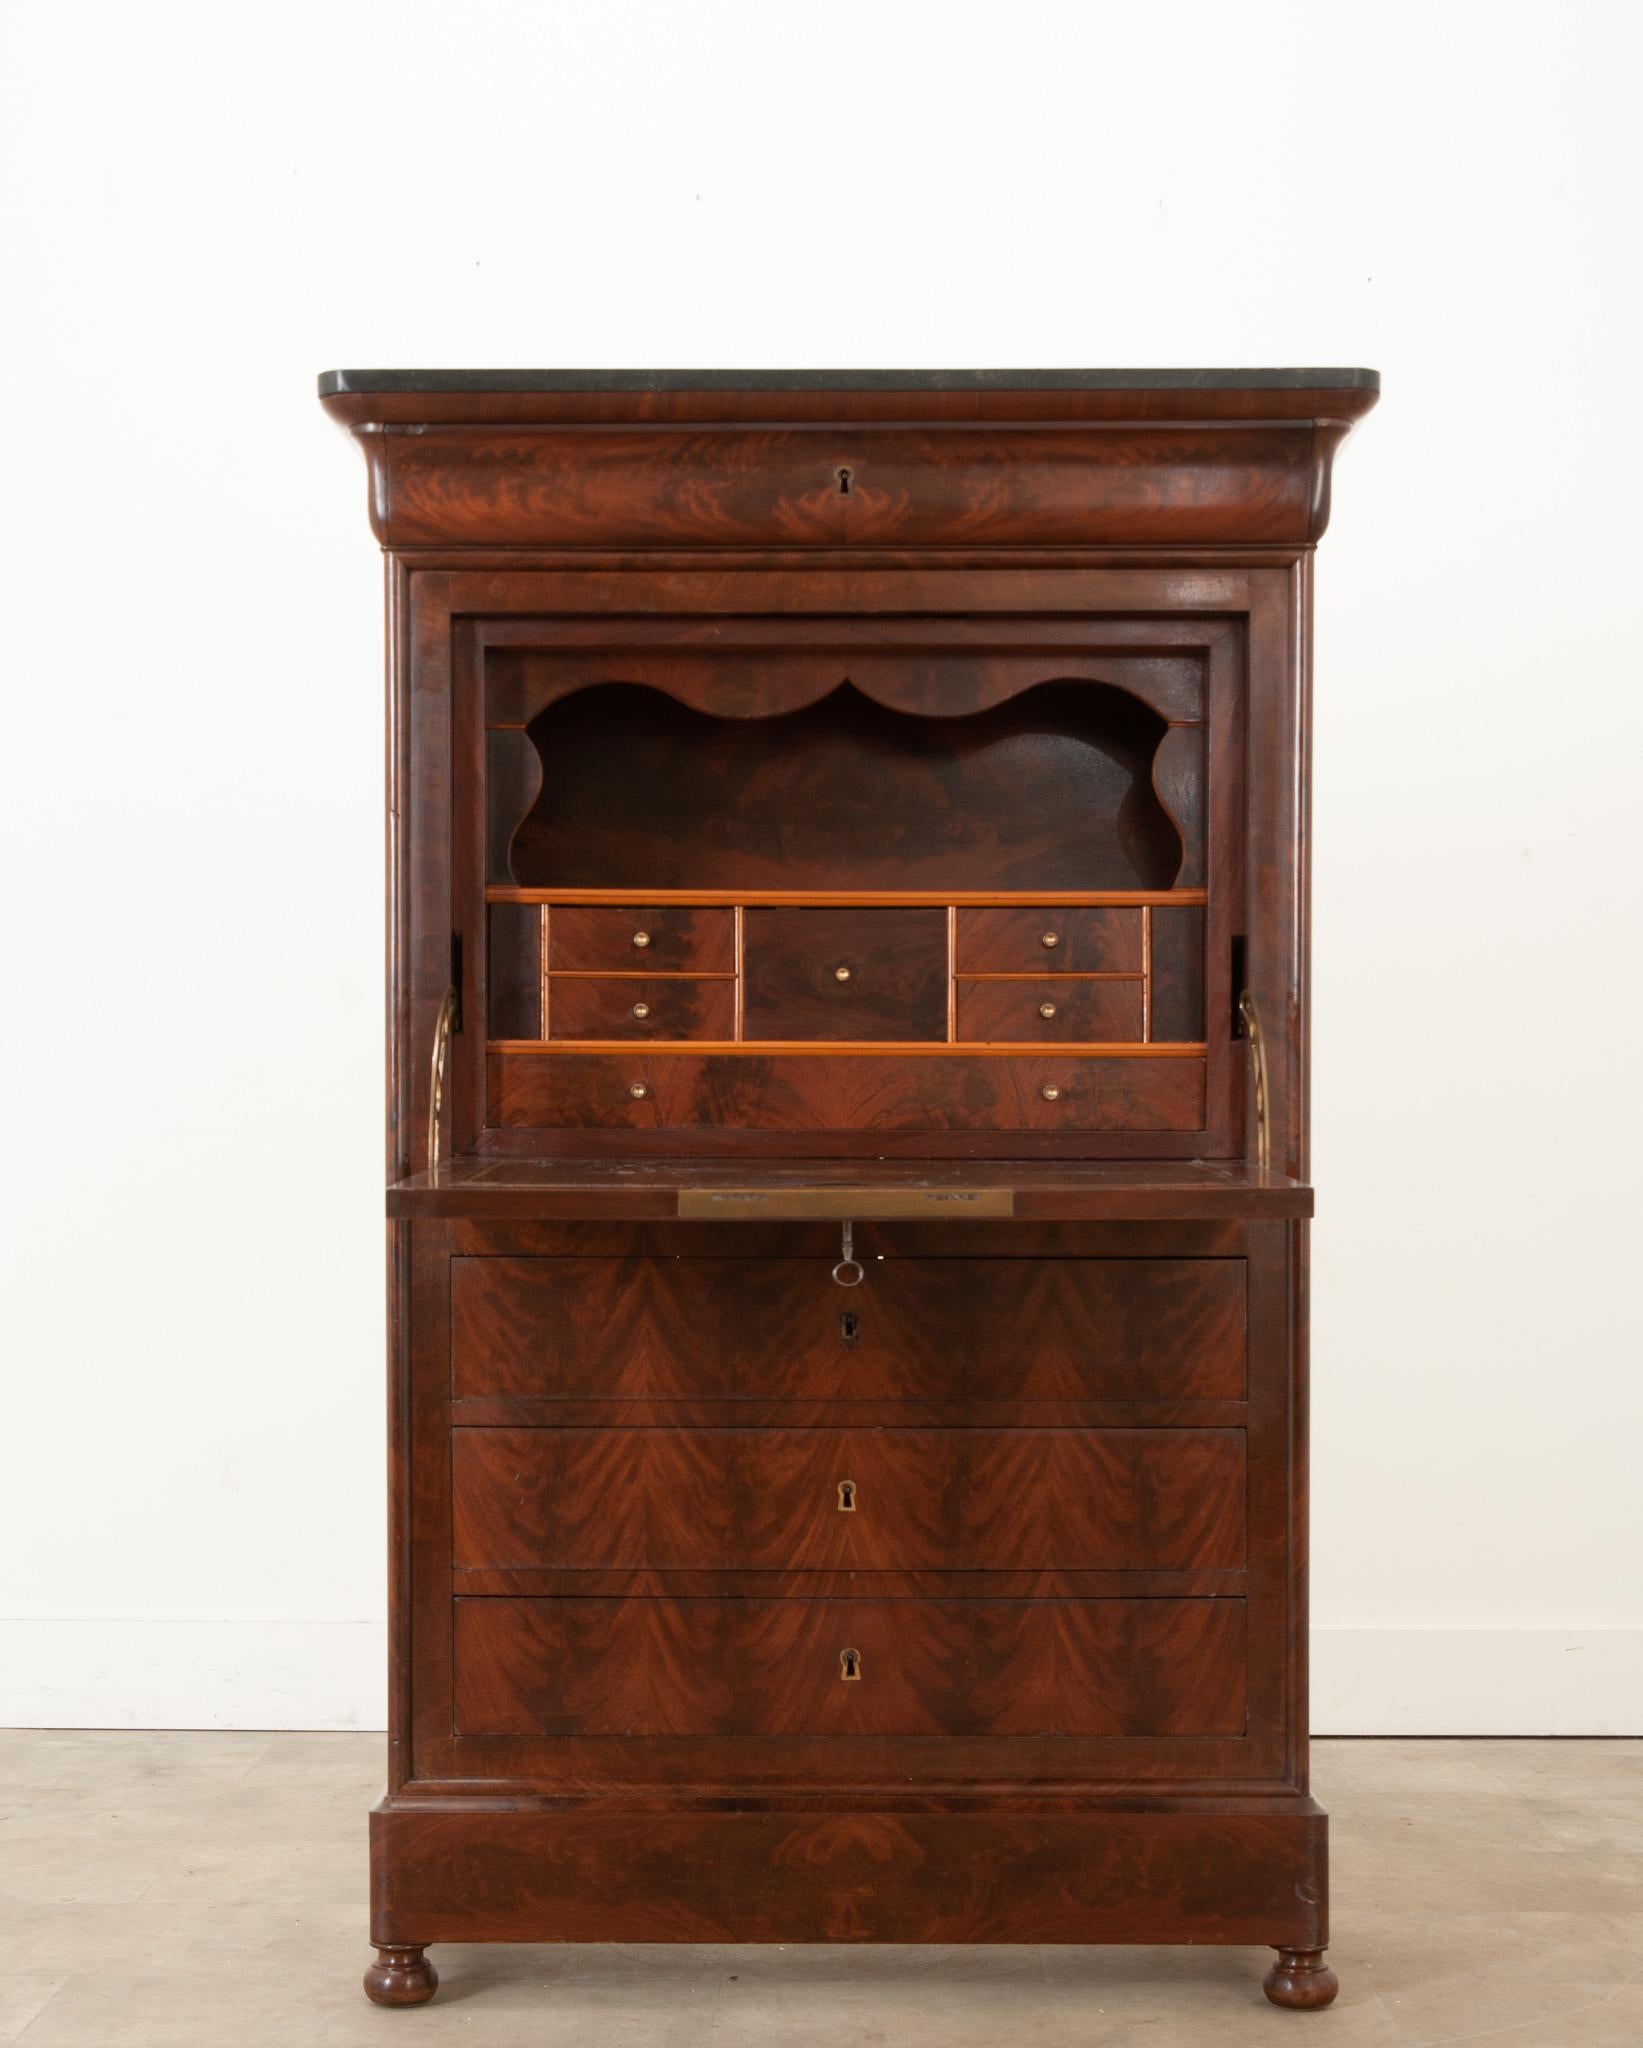 A handsome French 19th century bookmatched mahogany secretaire á abattant with a black marble top. A single drawer can be found at the top of the desk above a fold down writing surface, when unlocked this reveals a hand-carved scalloped design,